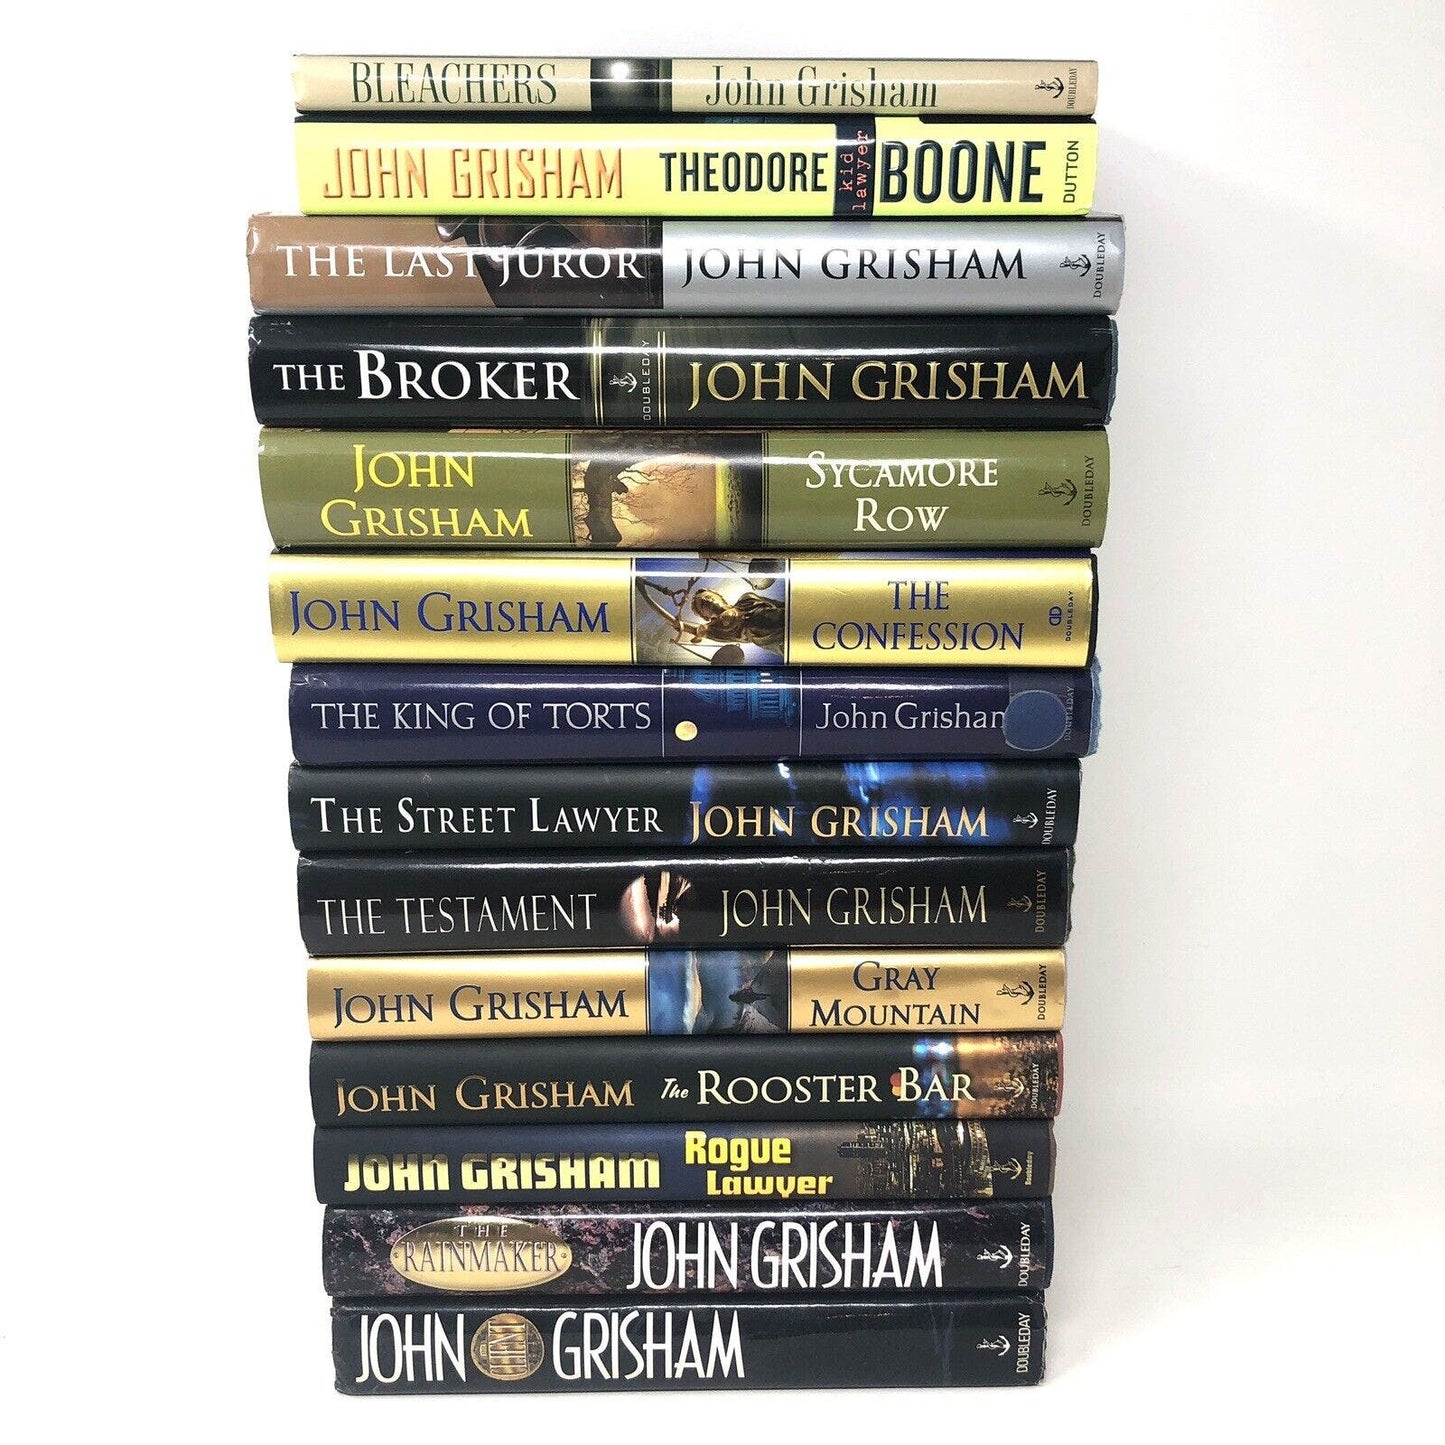 (First Edition) John Grisham Hardcover Book Lot - Uncle Buddy's Beard & Used Books